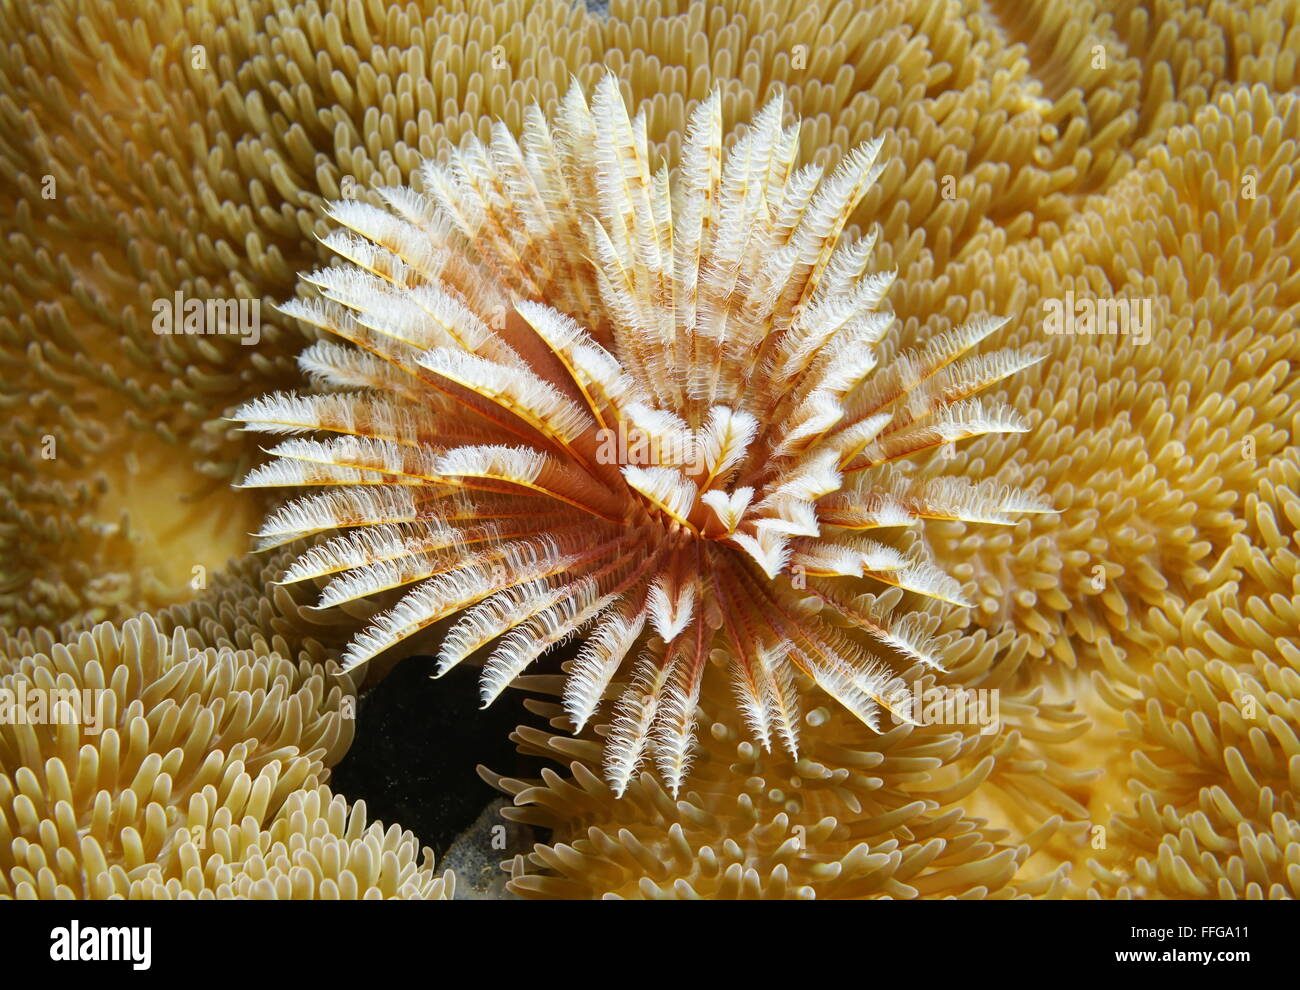 A Magnificent feather duster marine worm, Sabellastarte magnifica, surrounded by sea anemones, Caribbean sea Stock Photo